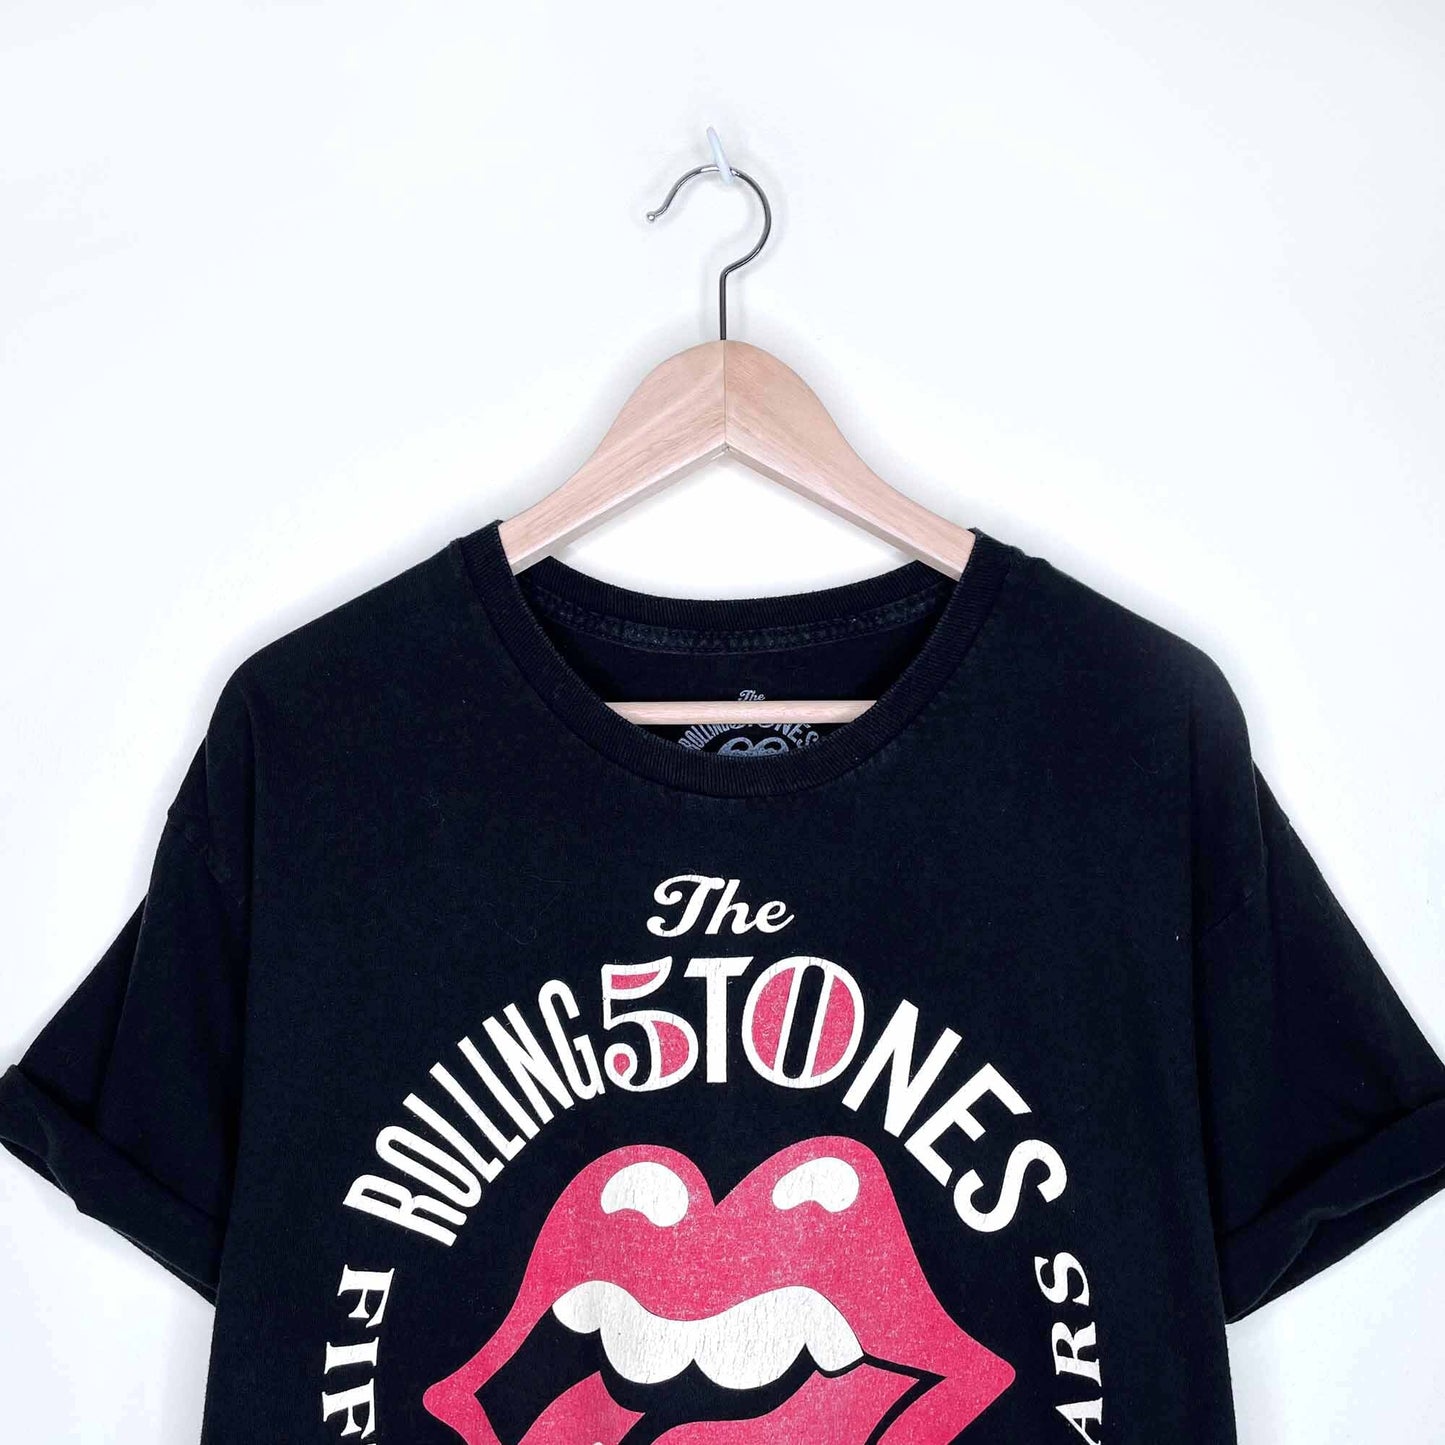 rolling stones 50th anniversary tour band tee 2013 - size large